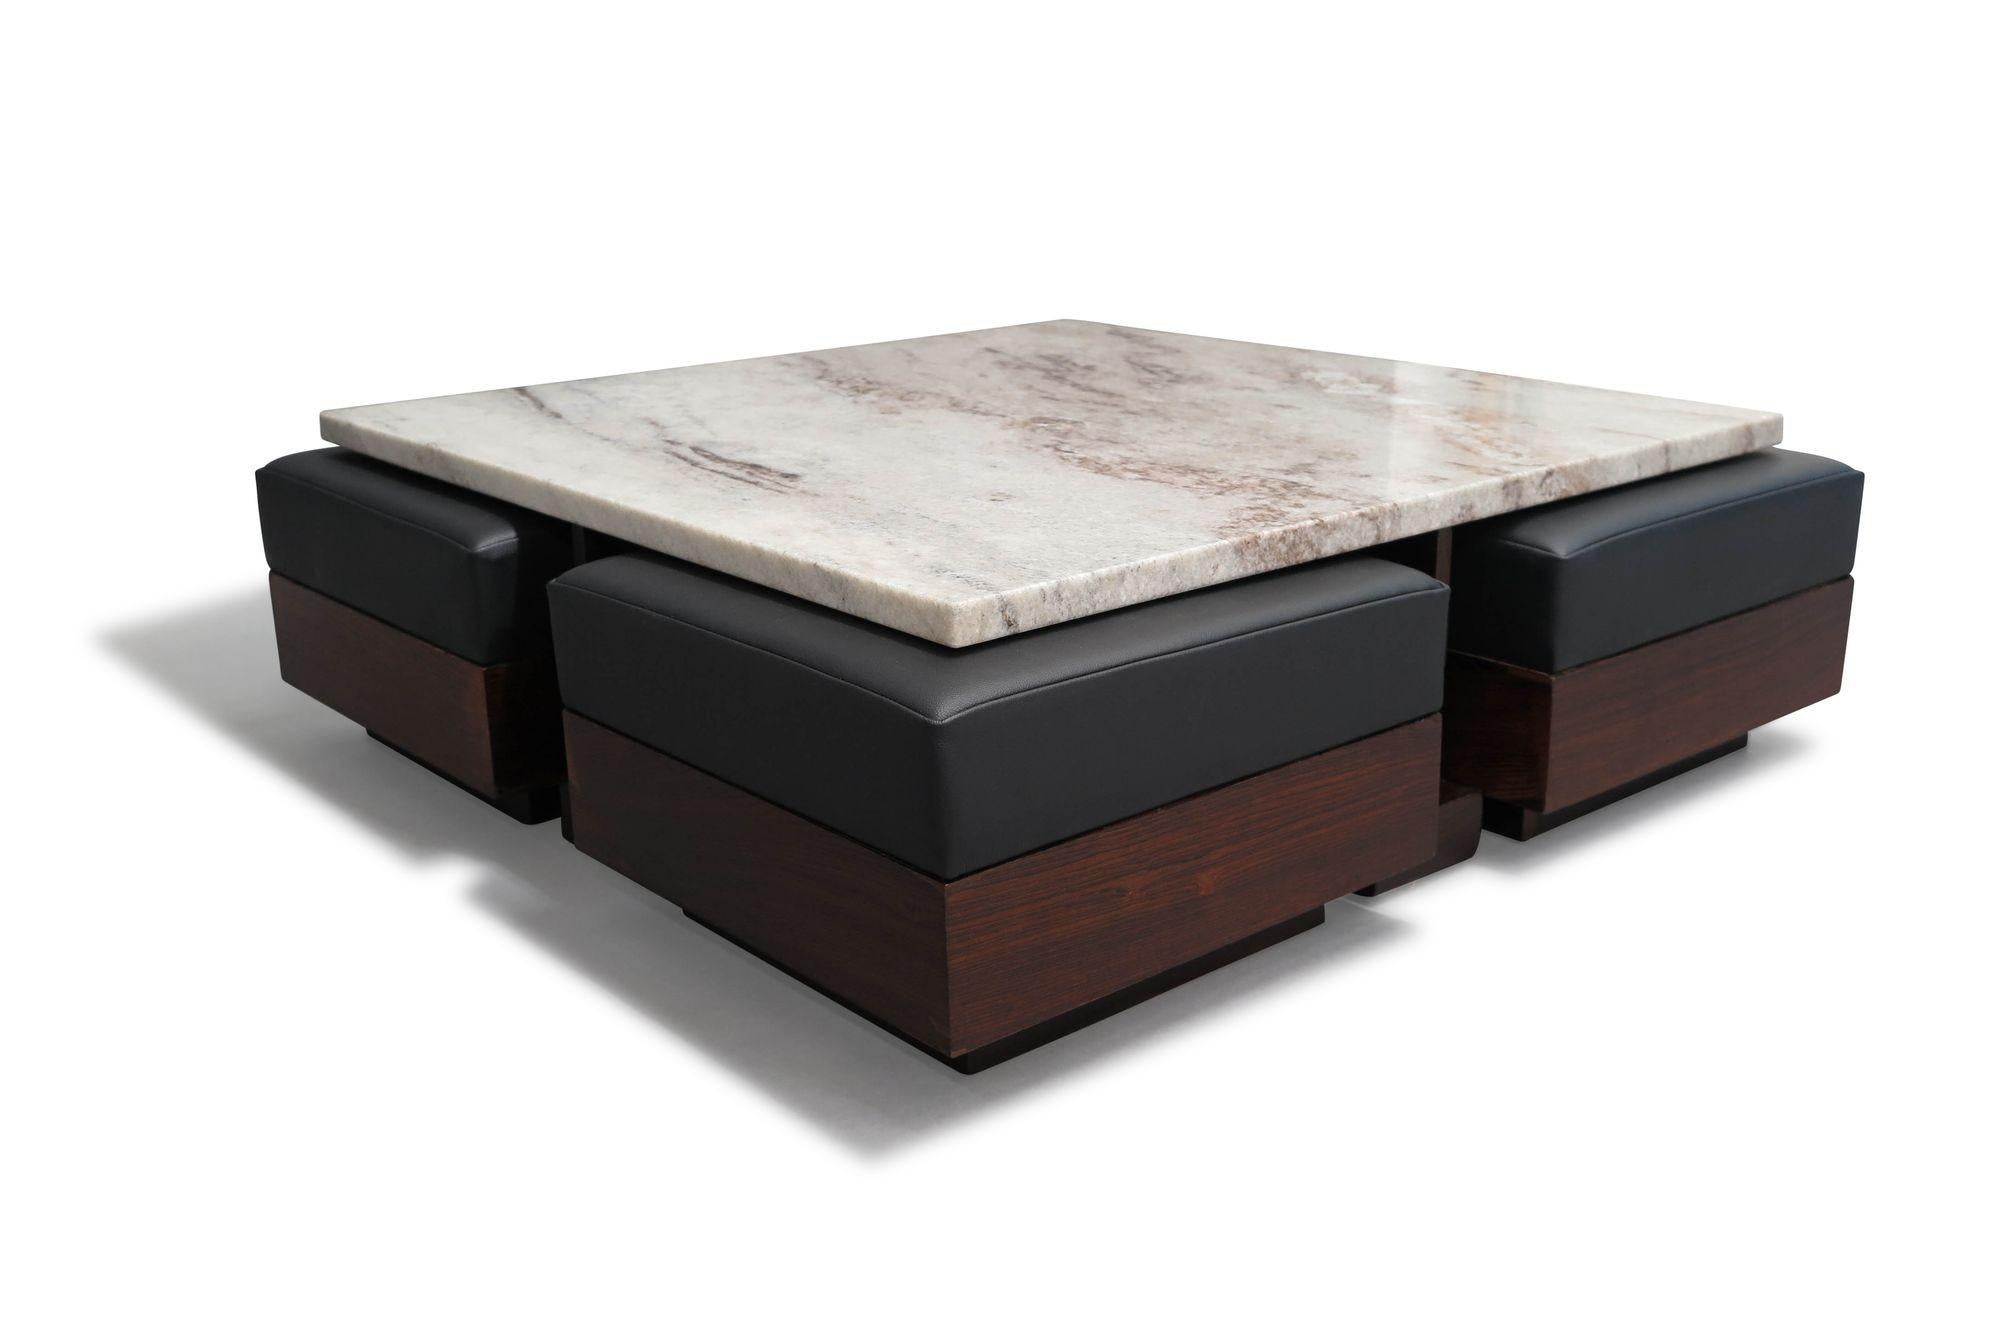 Unique and multi-functional Brazilian Modern marble-top coffee table and ottomans by Munis Zilberberg for Celina Decoracoes, Rio de Janeiro, Brazil, 1958. The coffee table features a rosewood X-shaped base with a marble top, accompanied by four